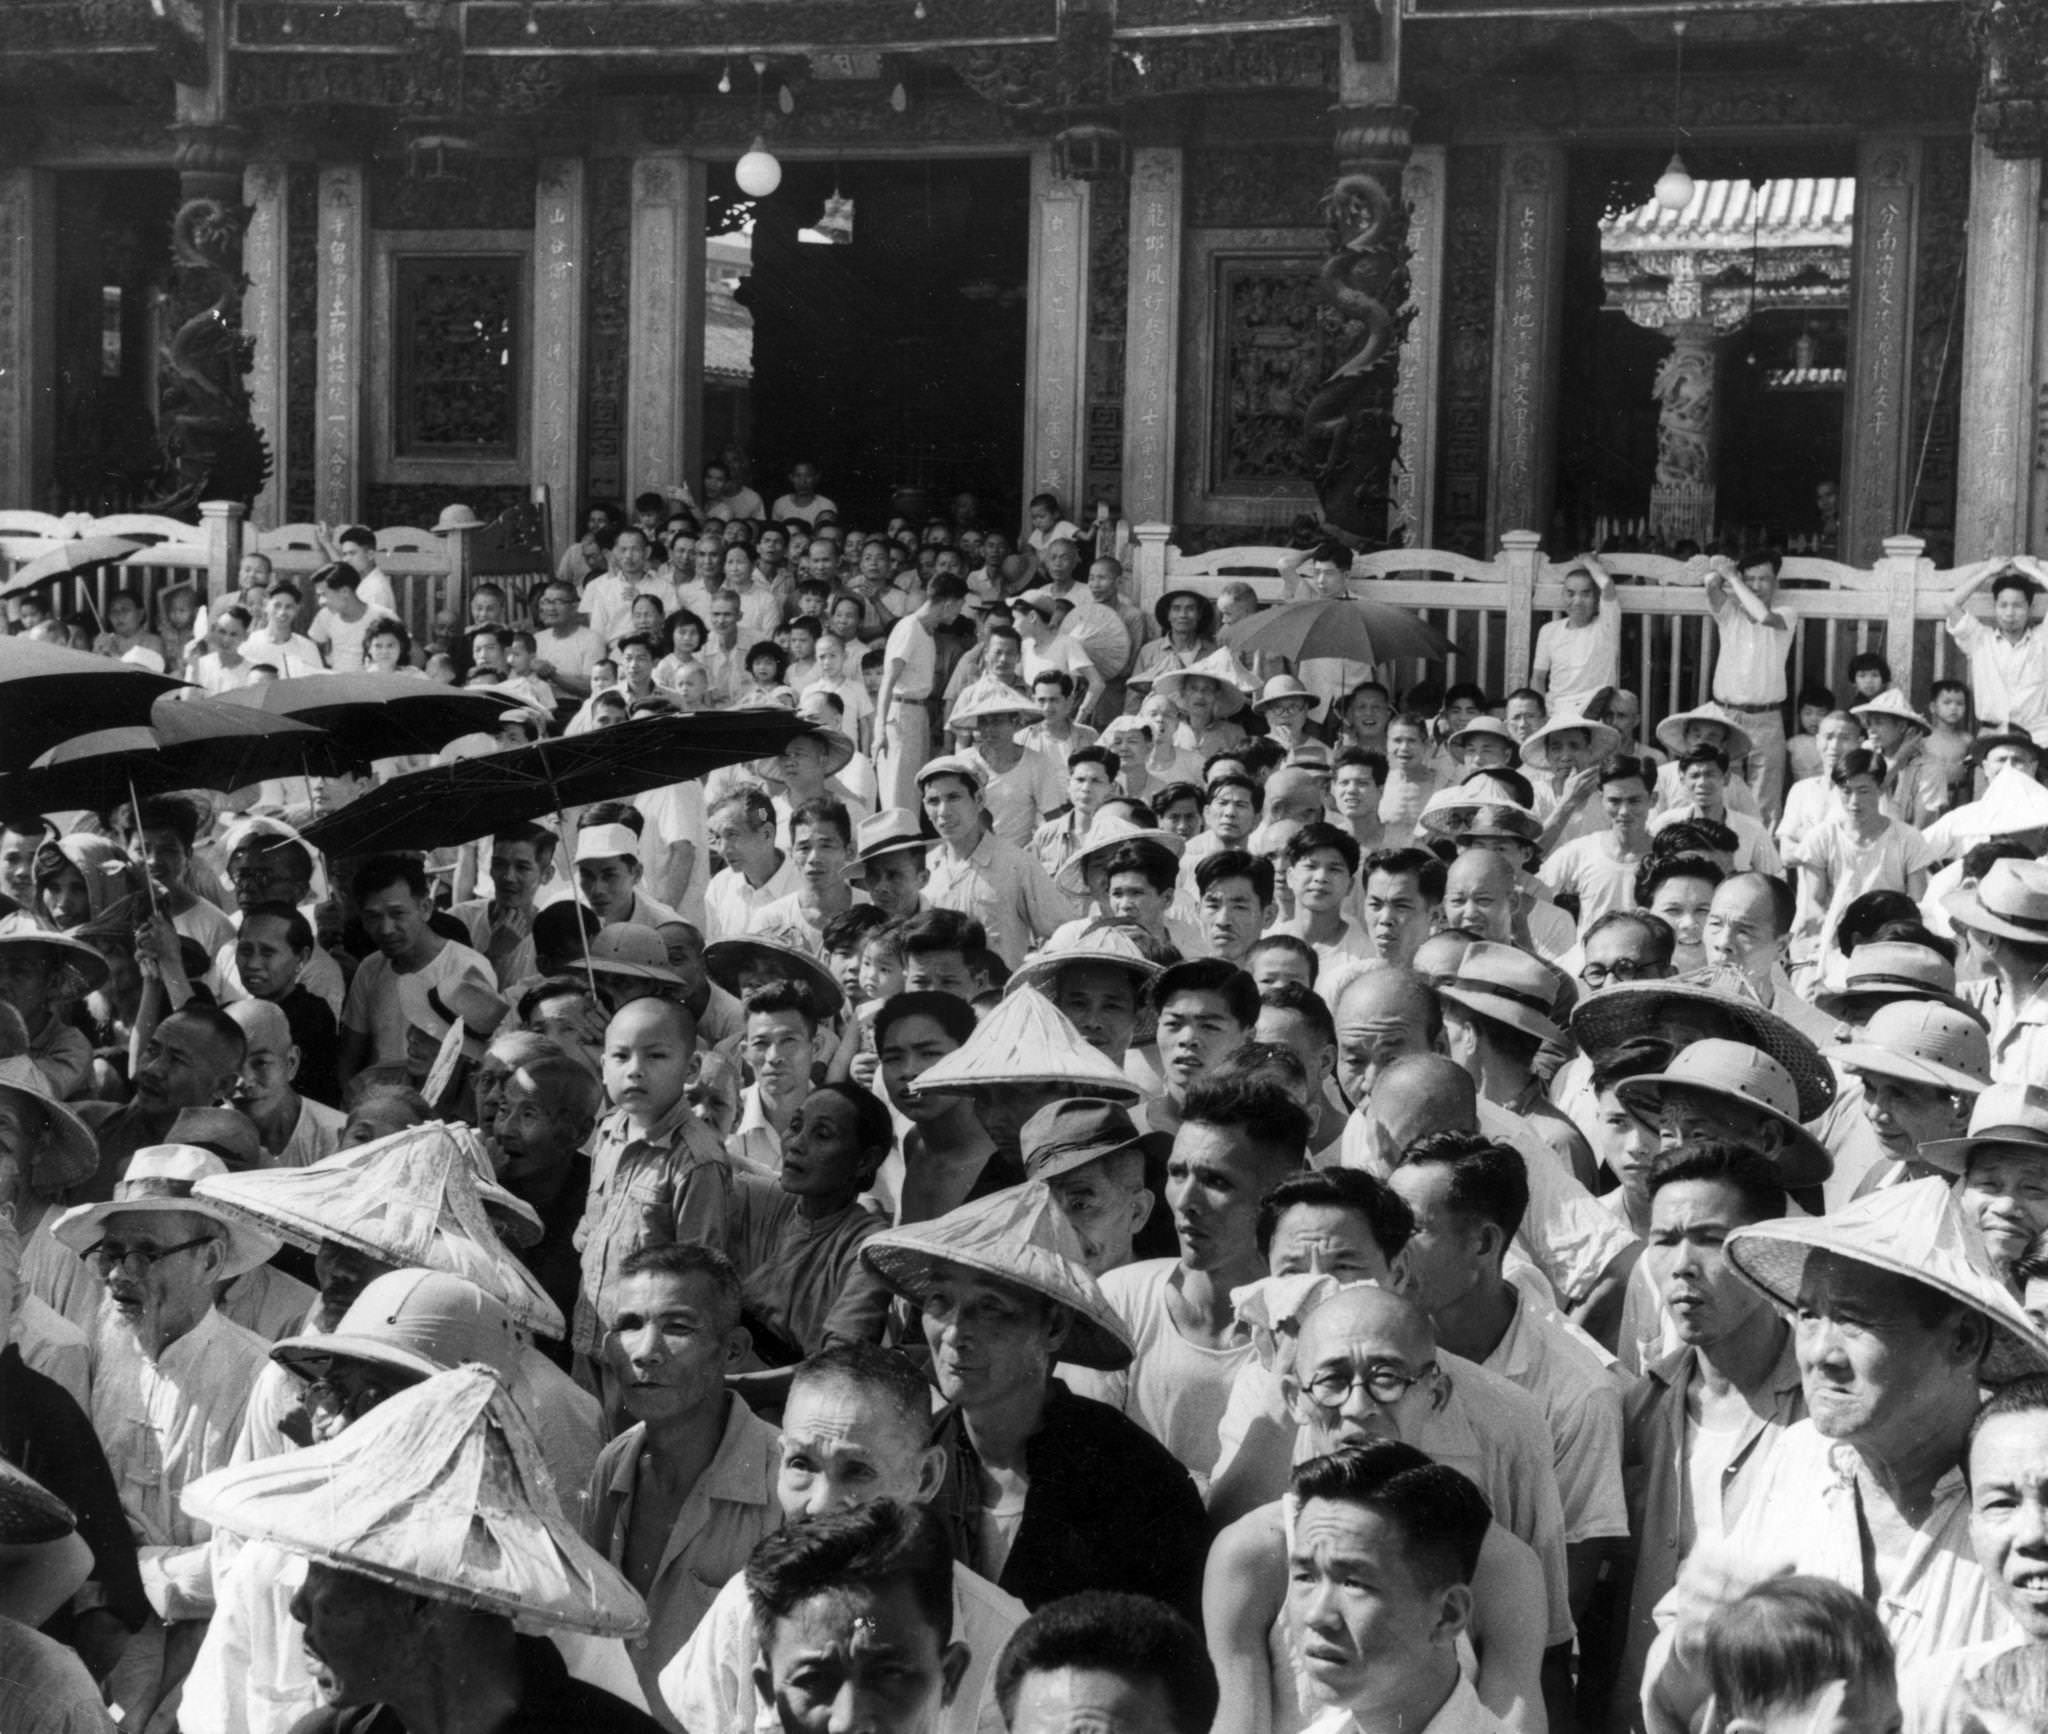 A crowd watching a performance of Chinese opera by a traveling theater company at Taipei, Taiwan, 1955